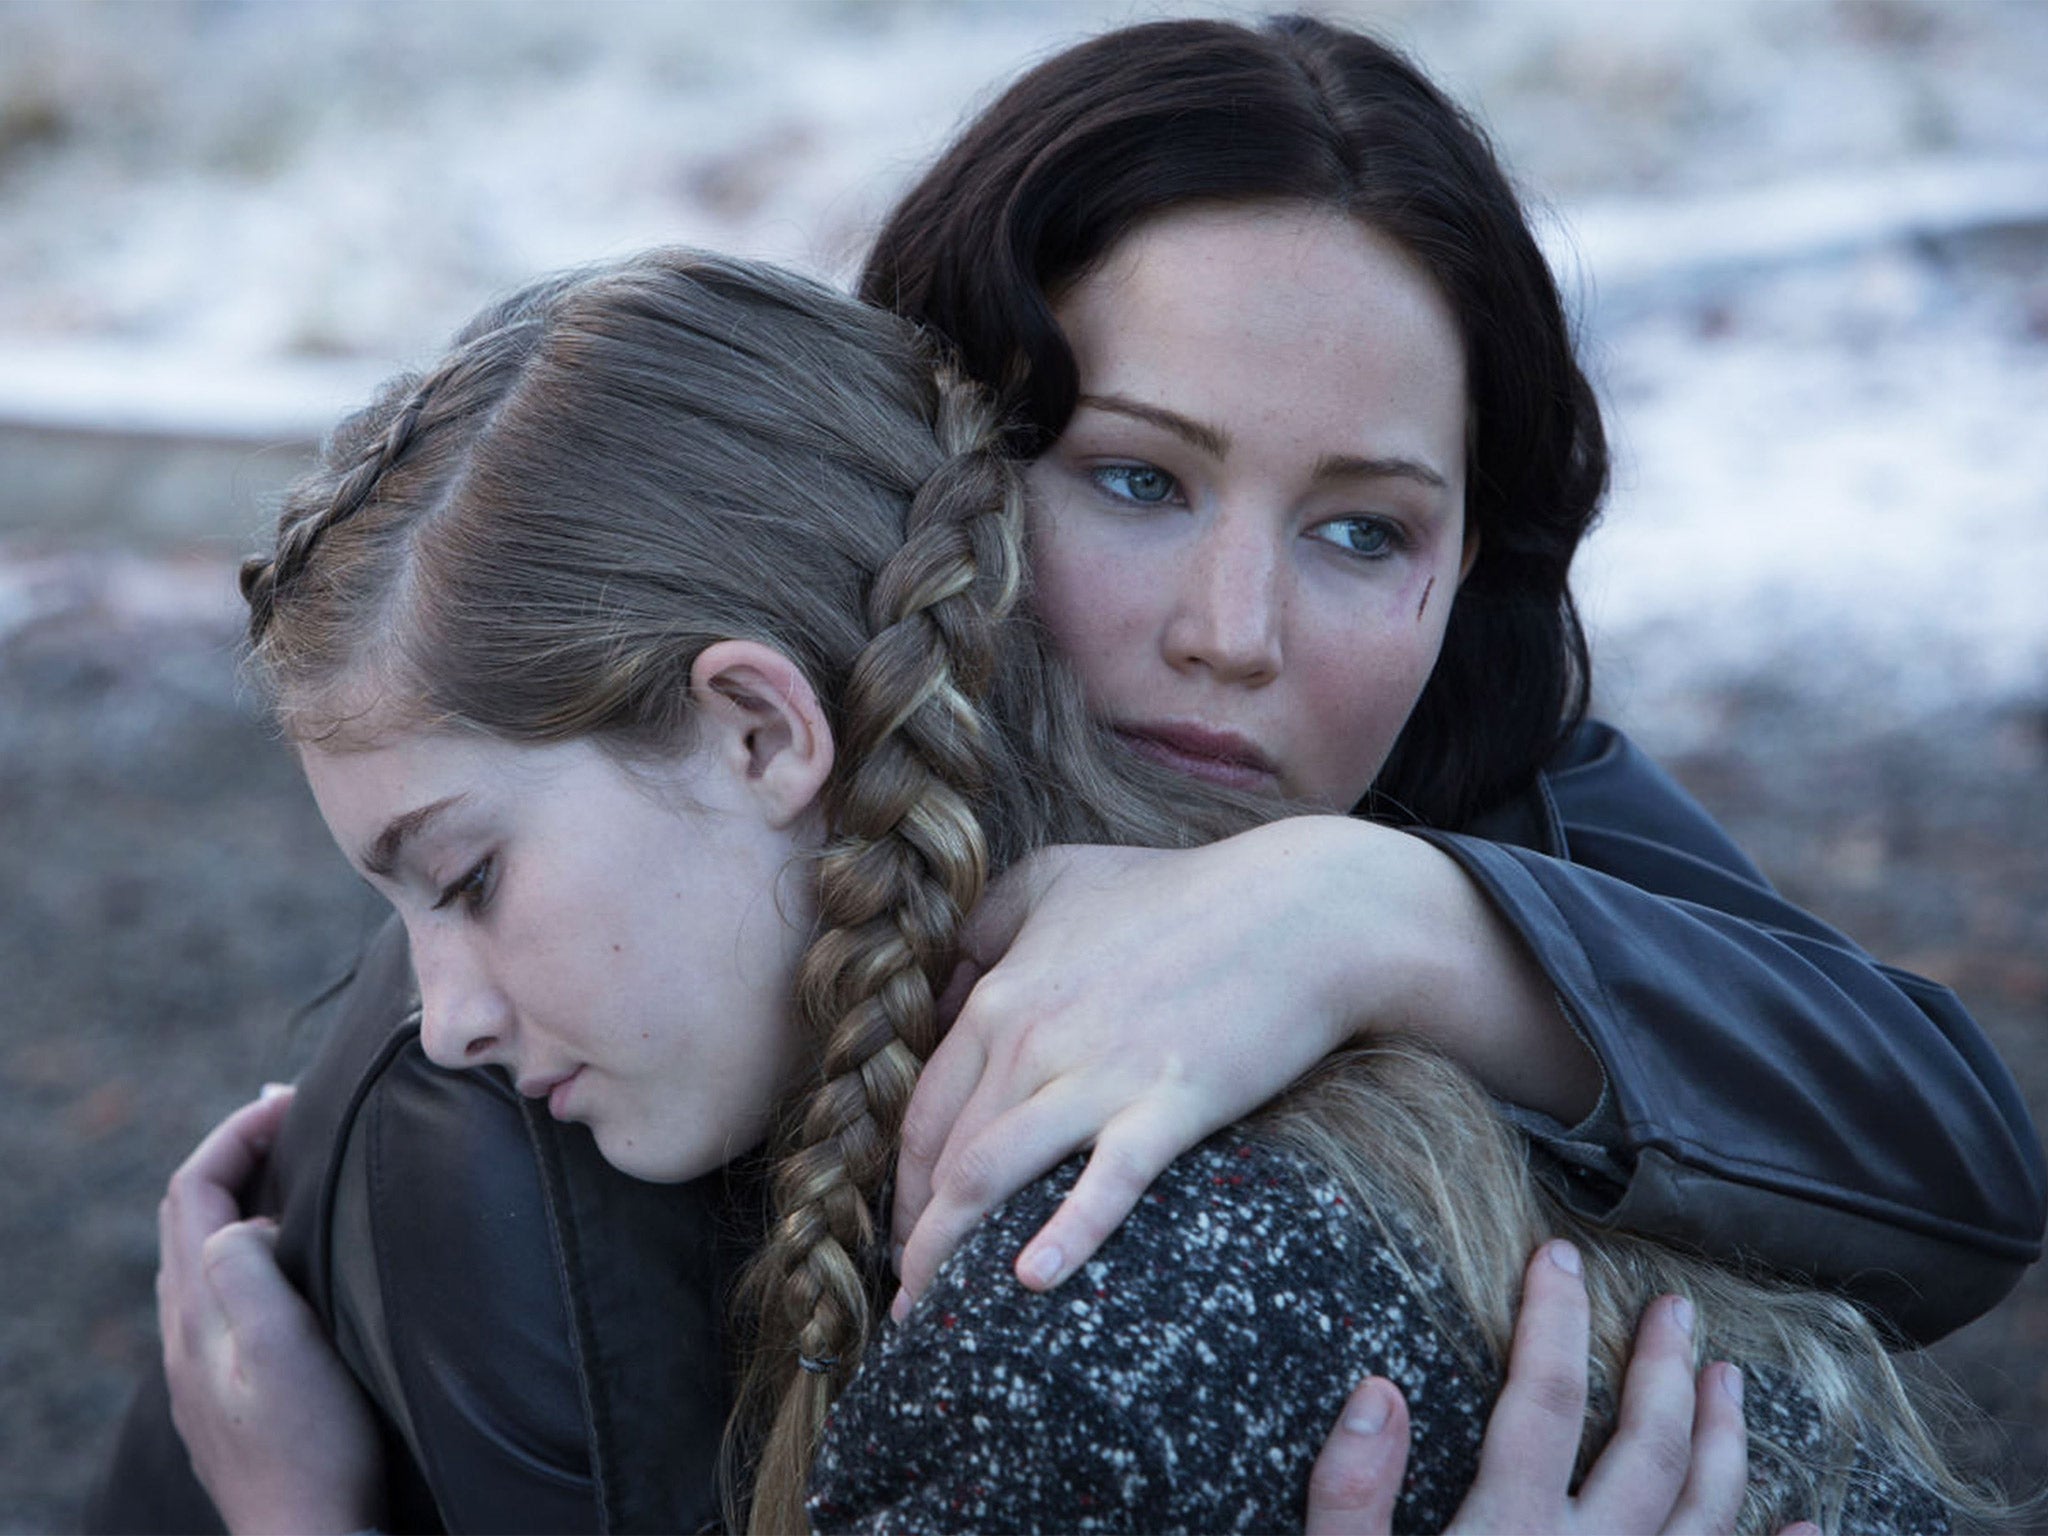 Hollywood can't turn it's back on female-led action films after the success of The Hunger Games